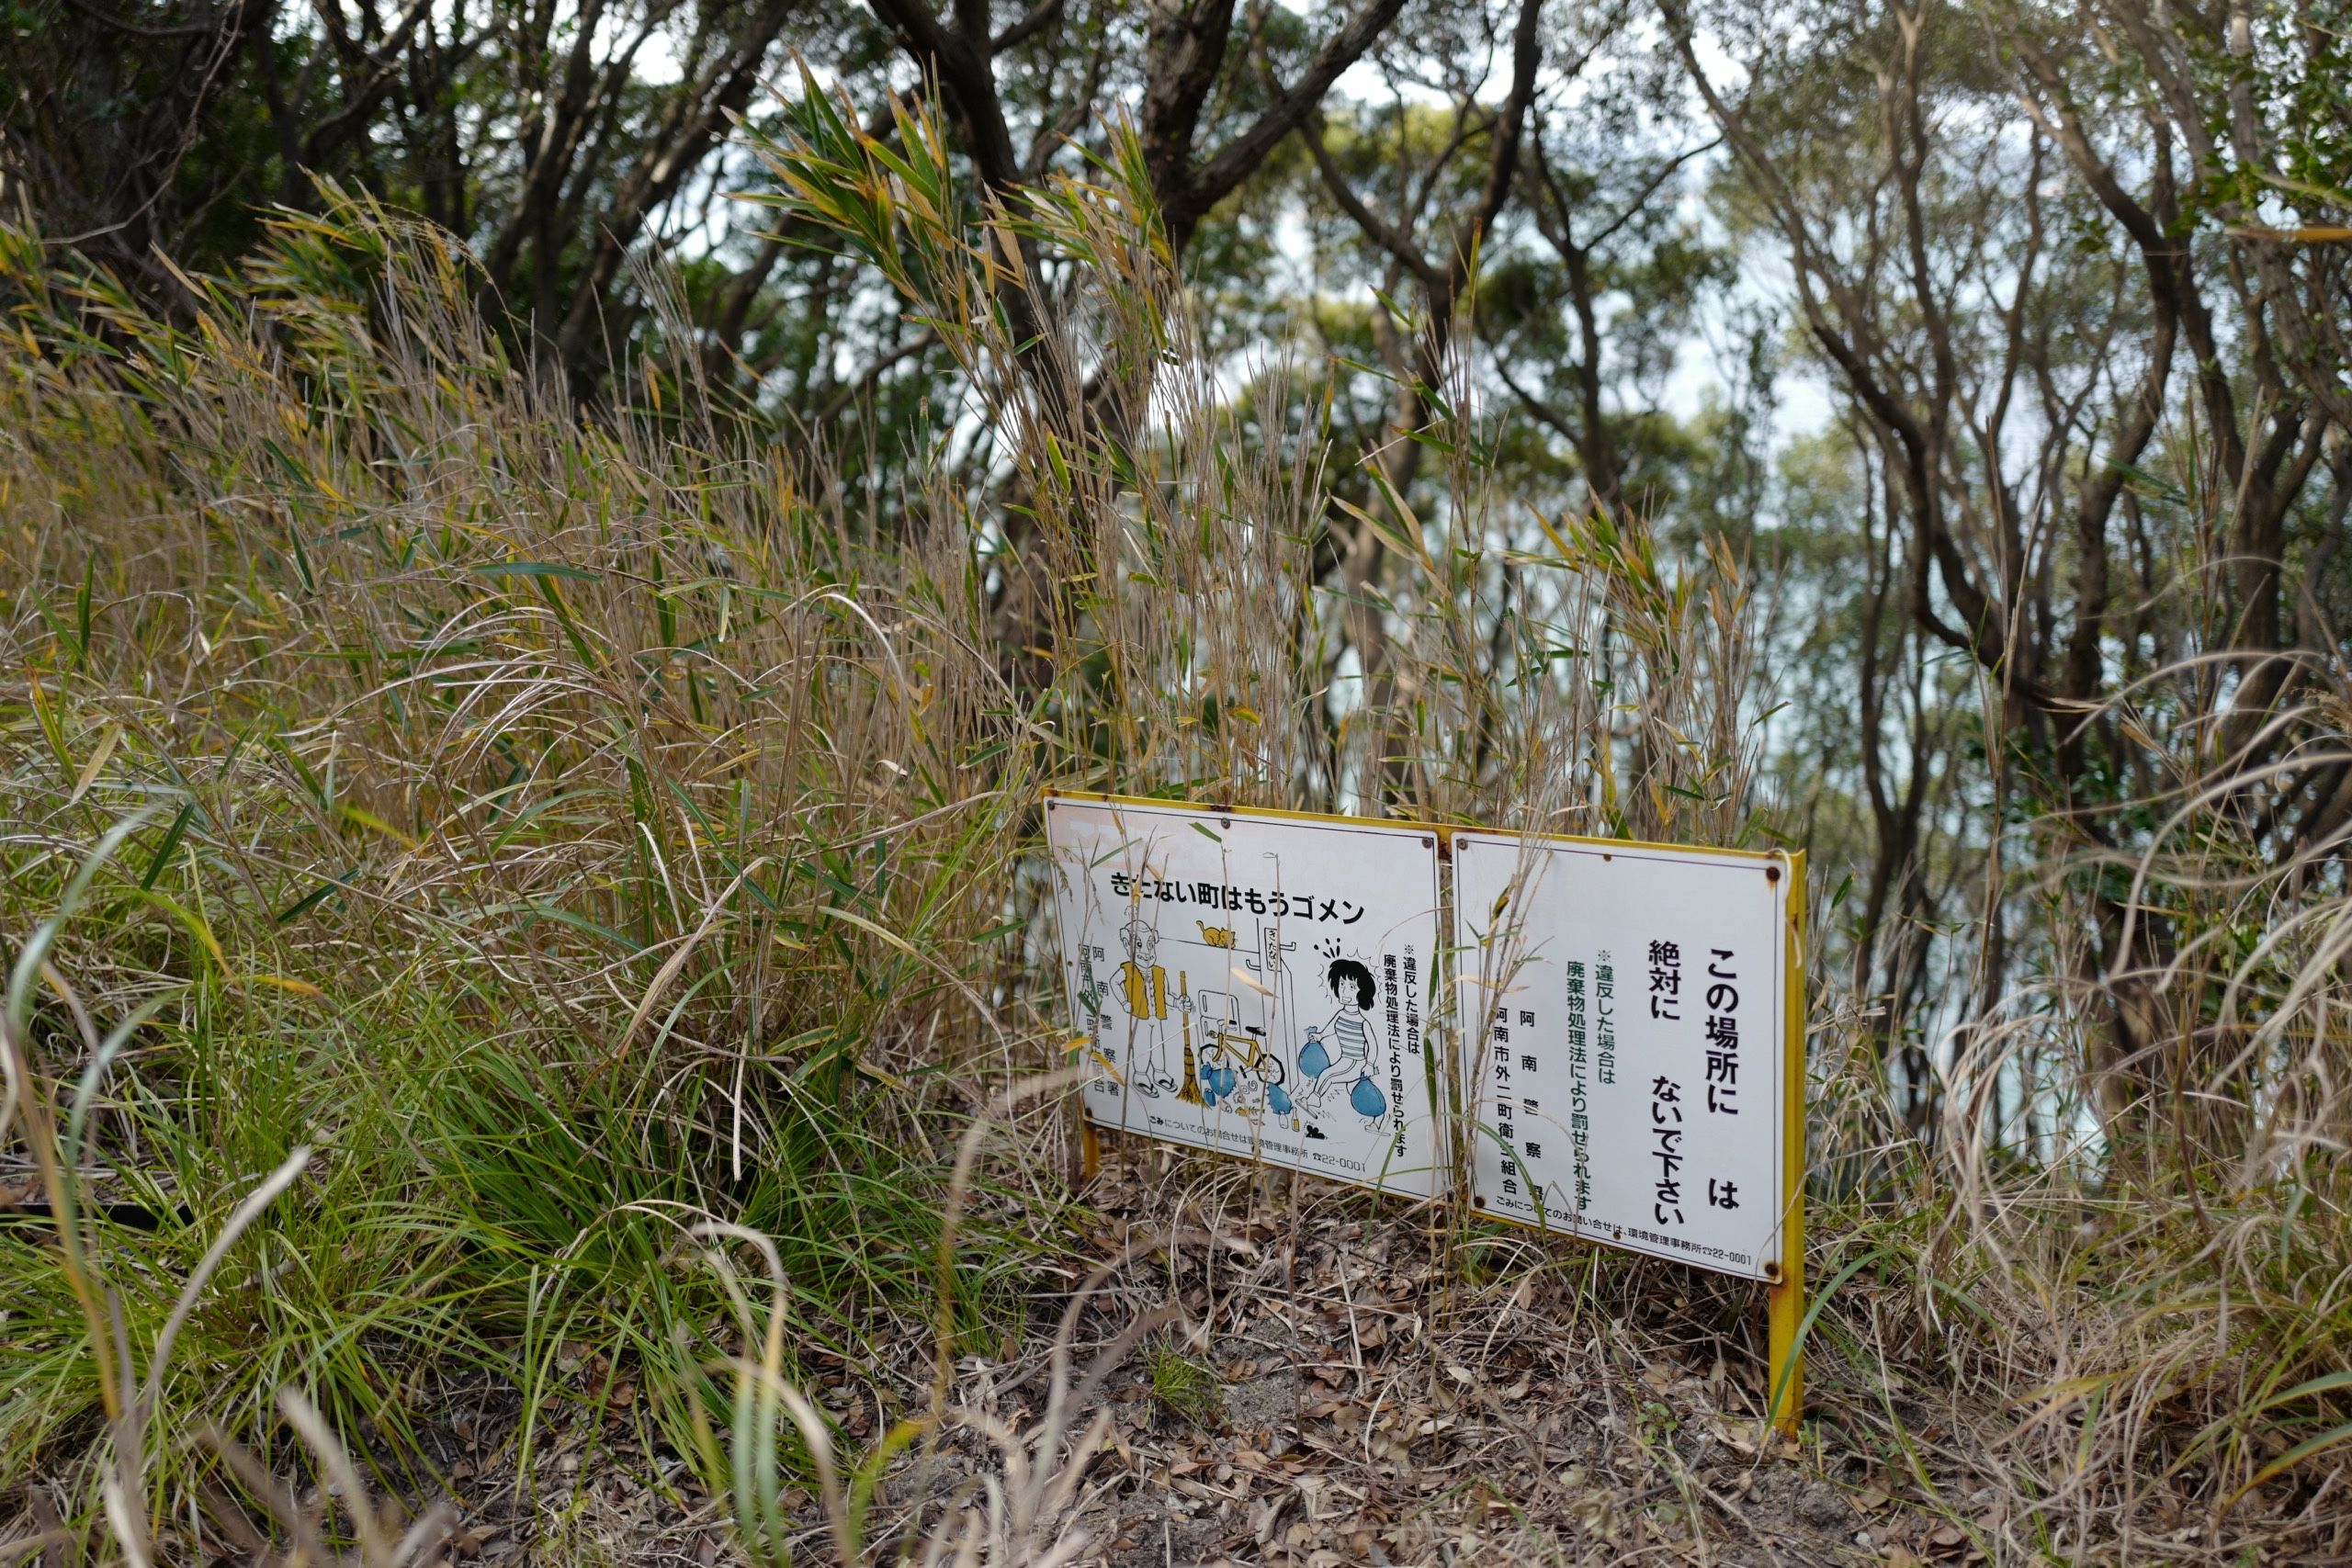 A sign in the same place warns against littering.